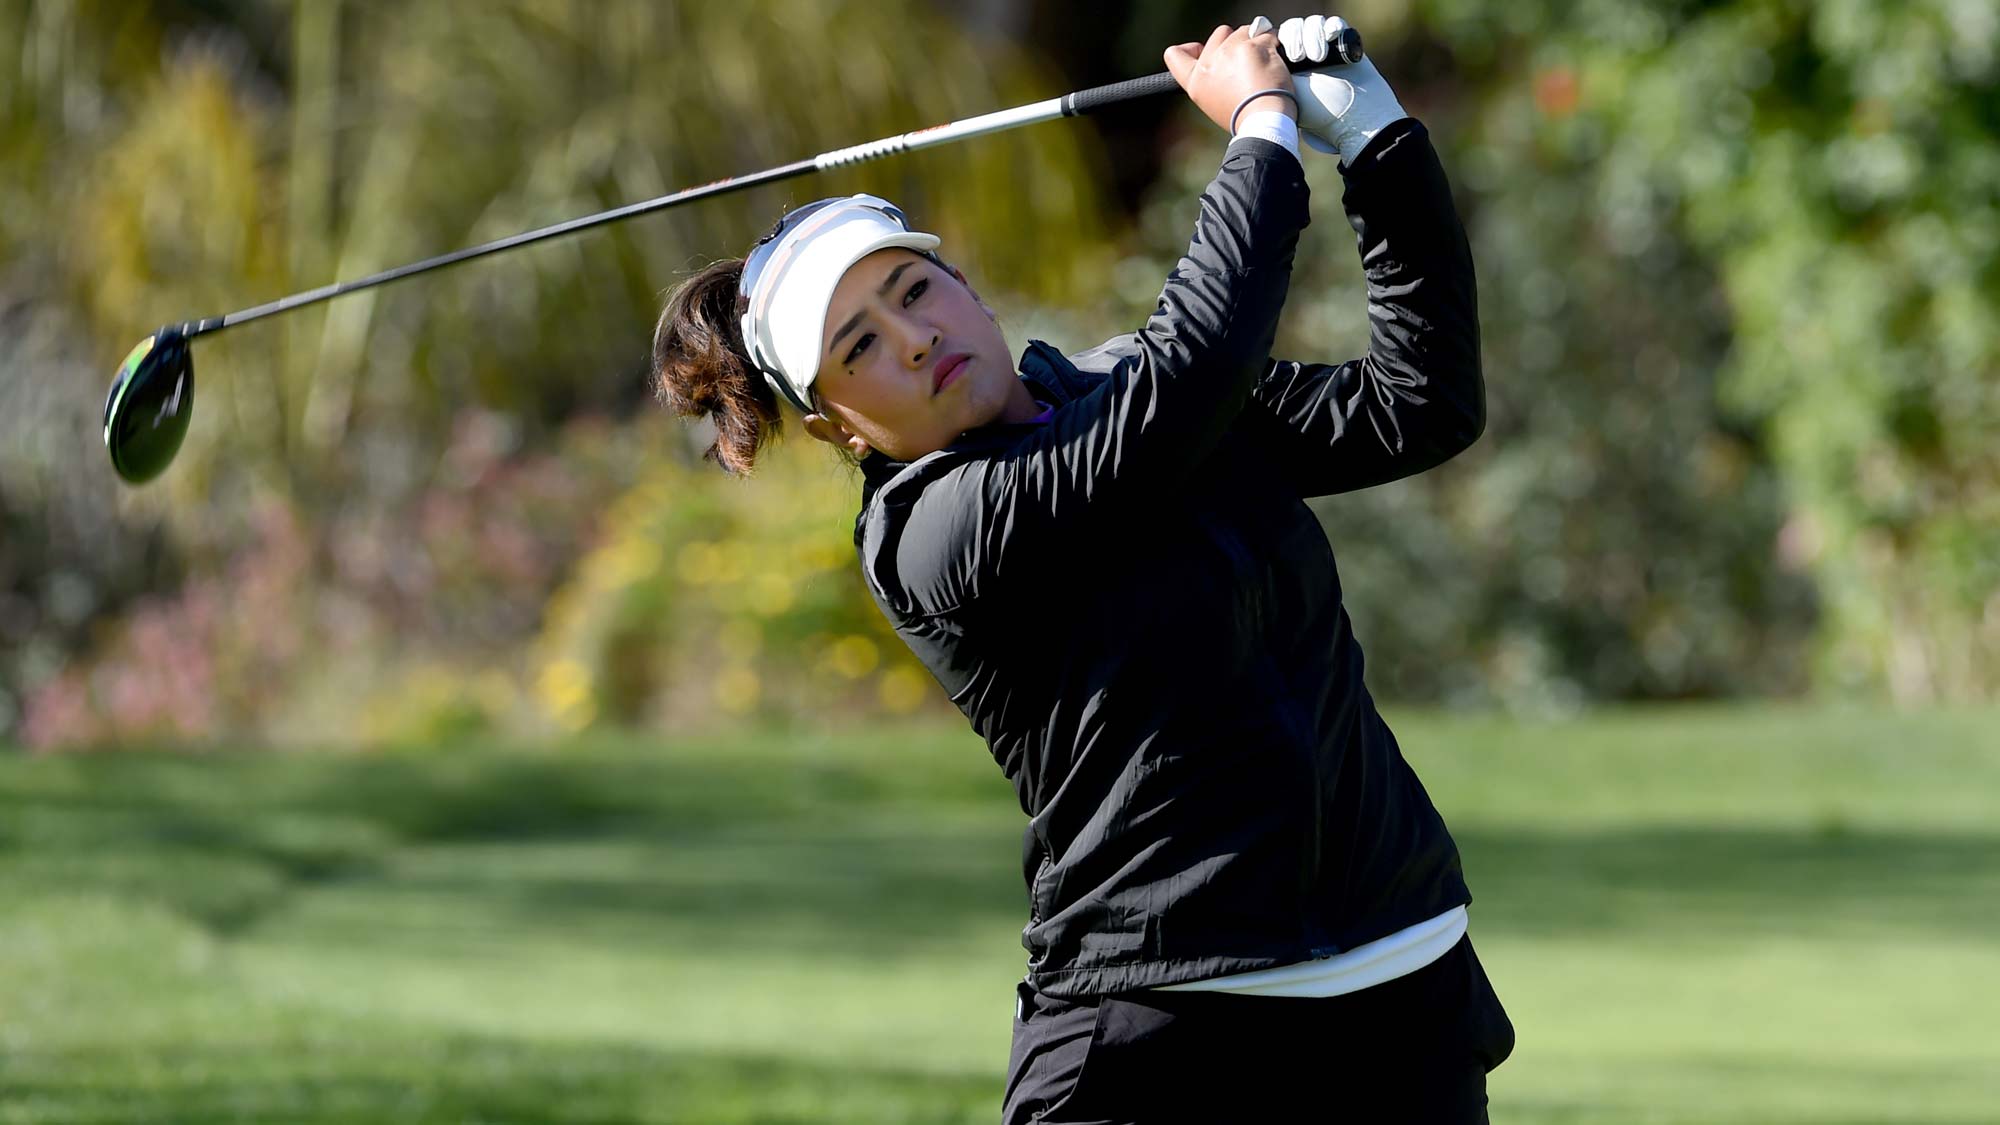 Thidapa Suwannapura of Thailand hits her tee shot on the fourth hole during the second round of the Kia Classic